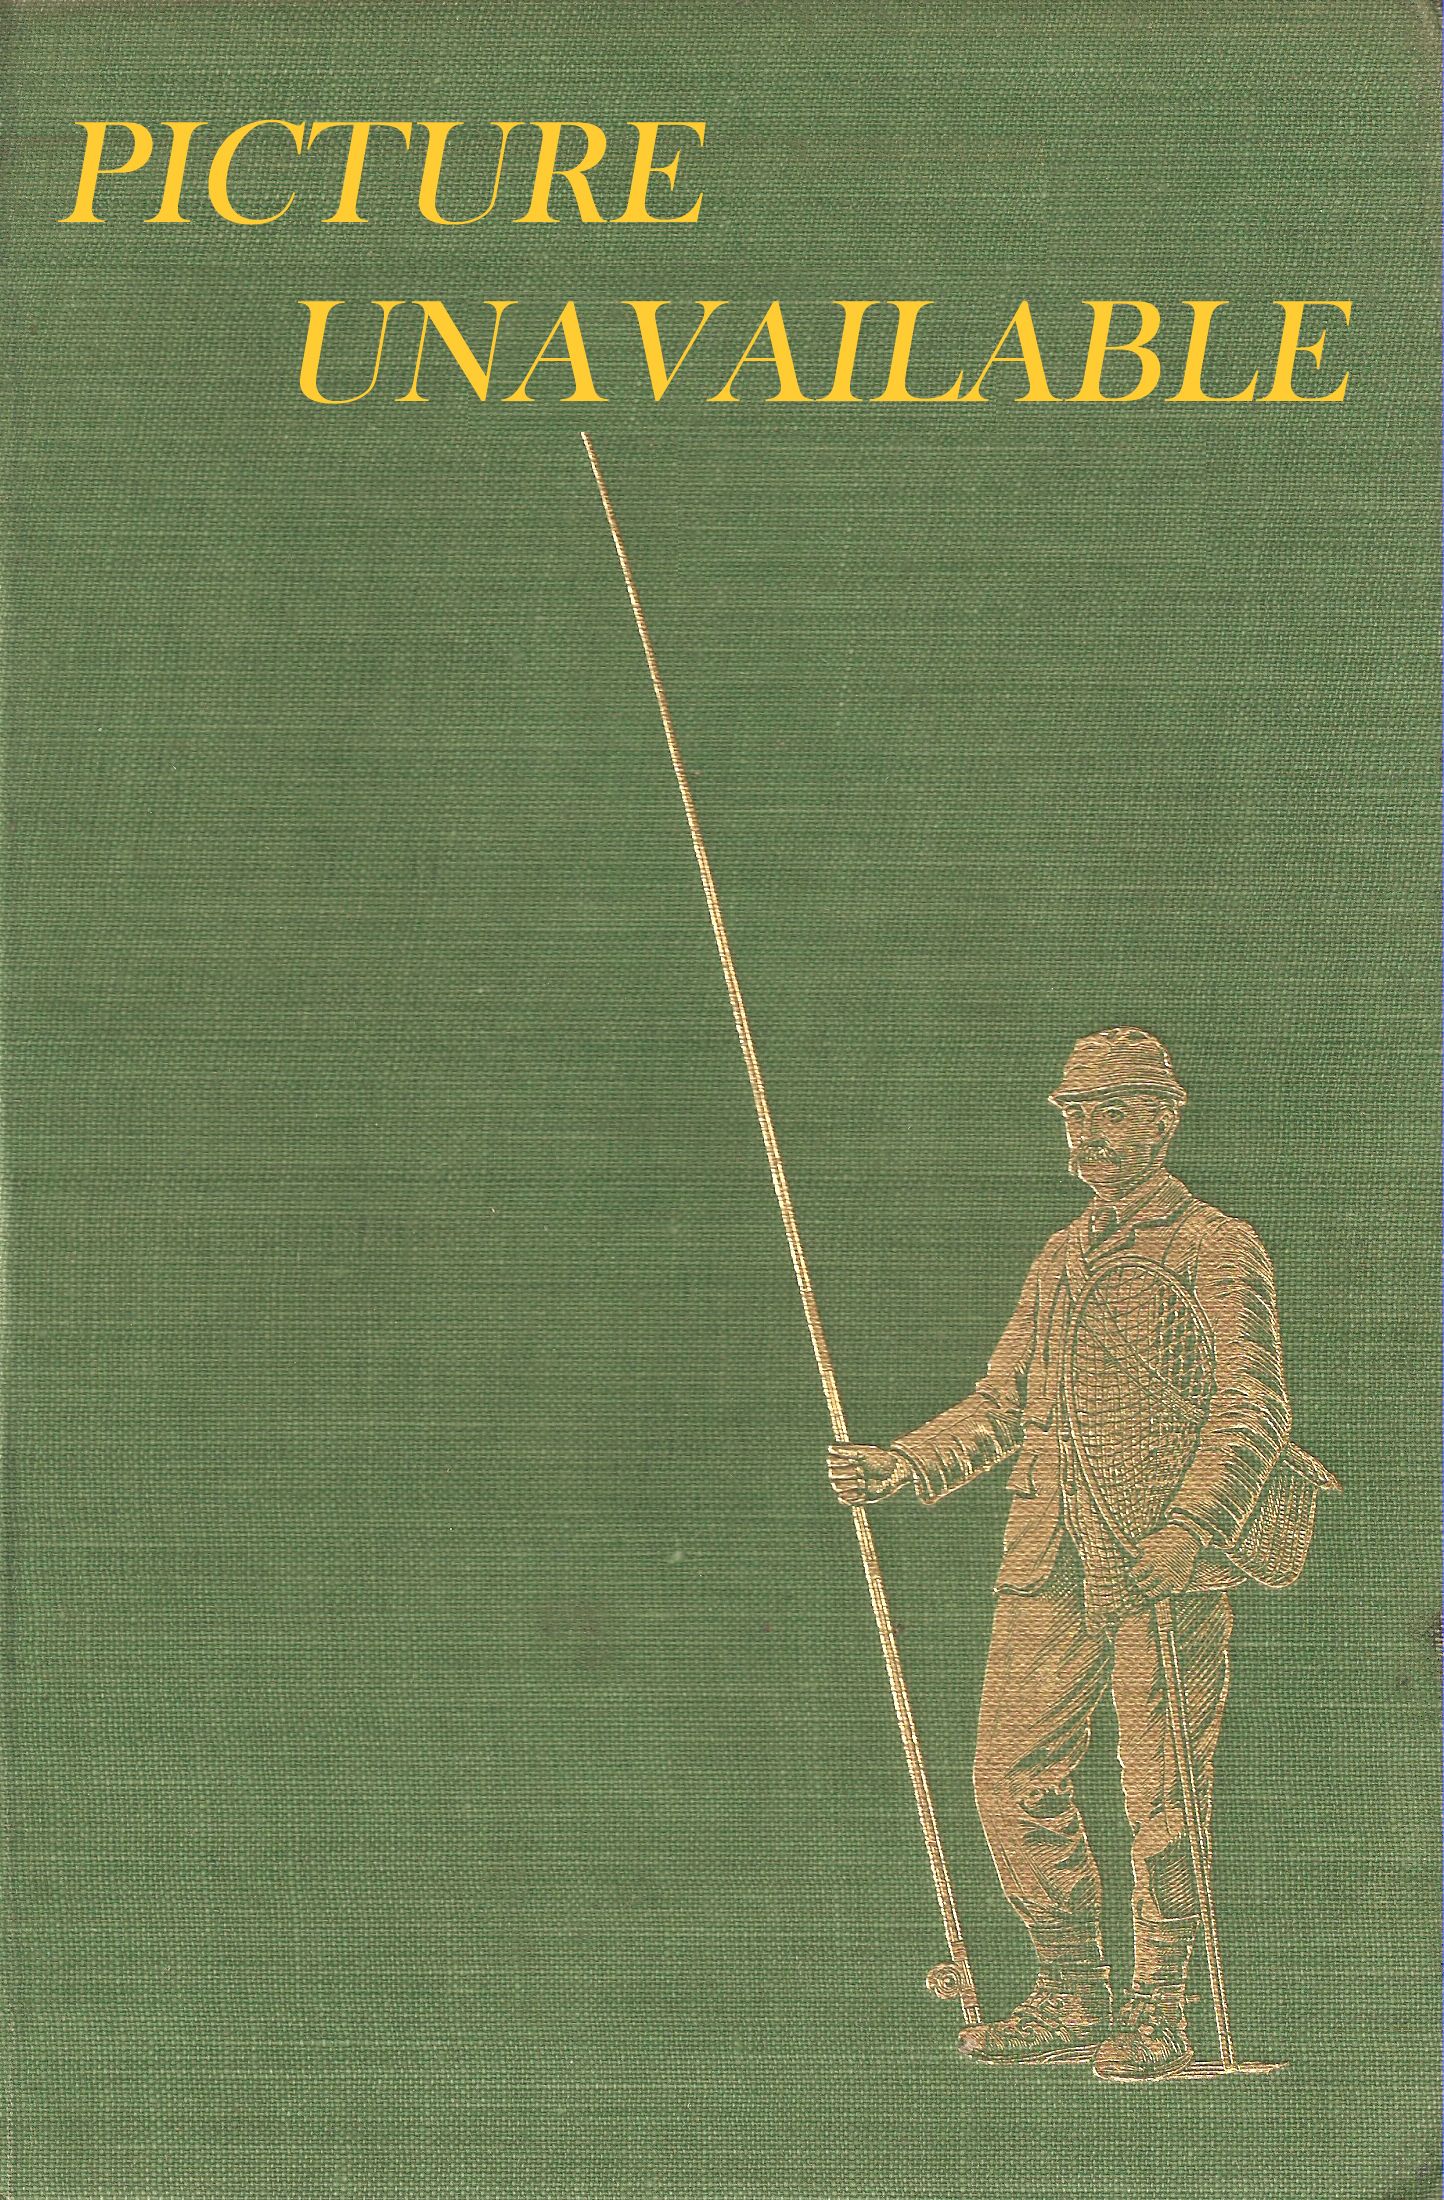 THE FALCONER: THE JOURNAL OF THE BRITISH FALCONERS' CLUB VOLUME VII No. 2.  1978.